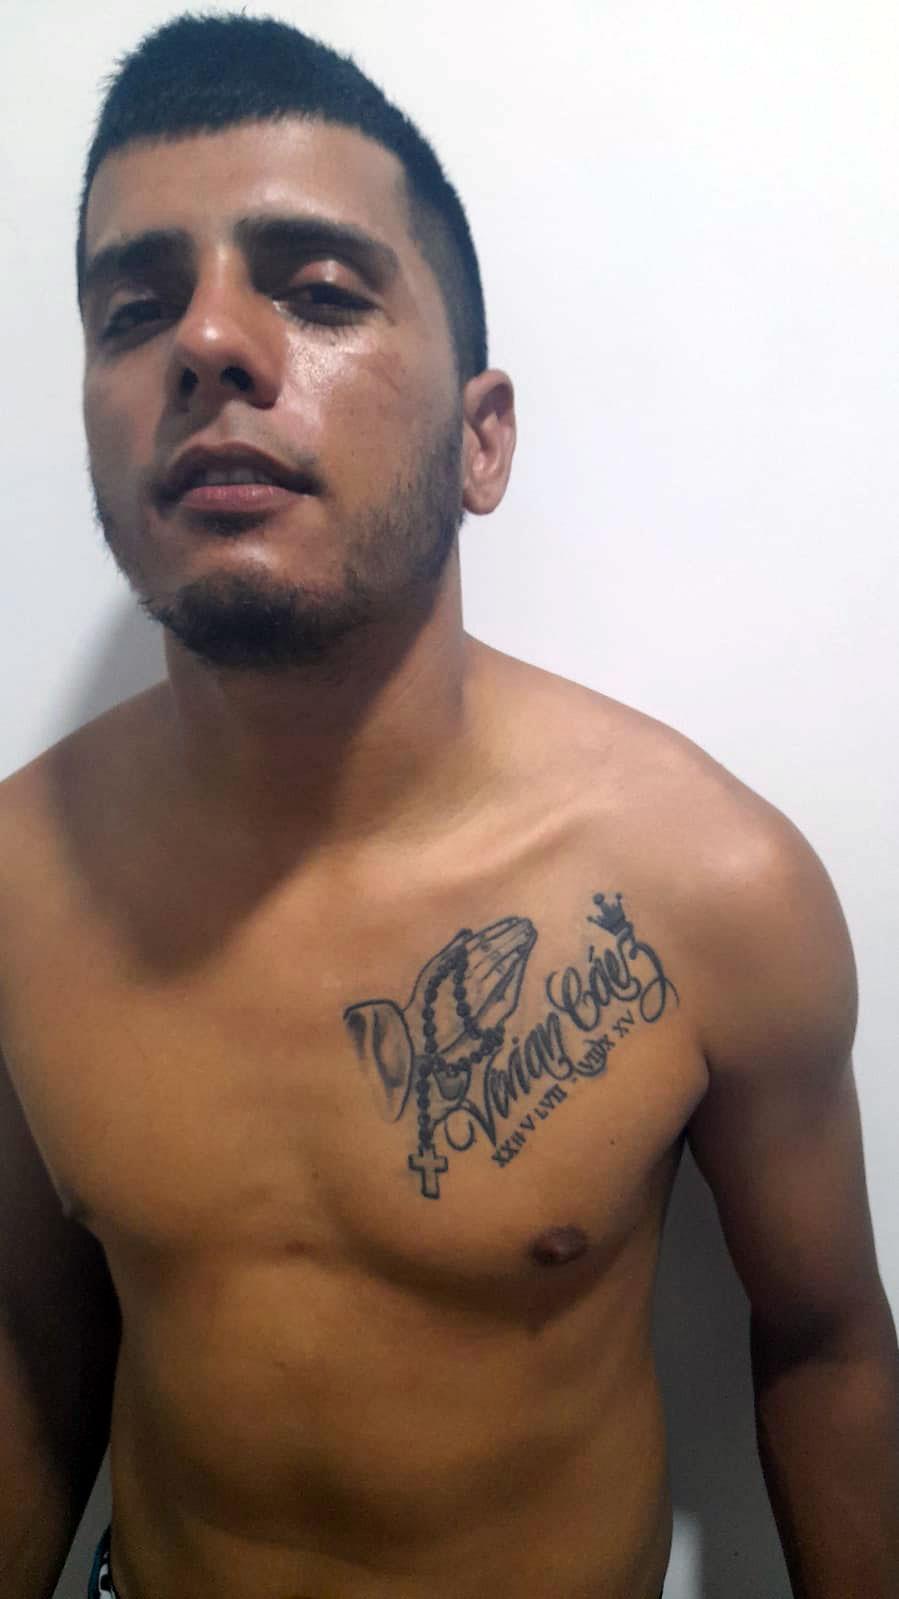 Jose Antonio Potes has a tattoo on the left side of his chest depicting his grandmother's name. 